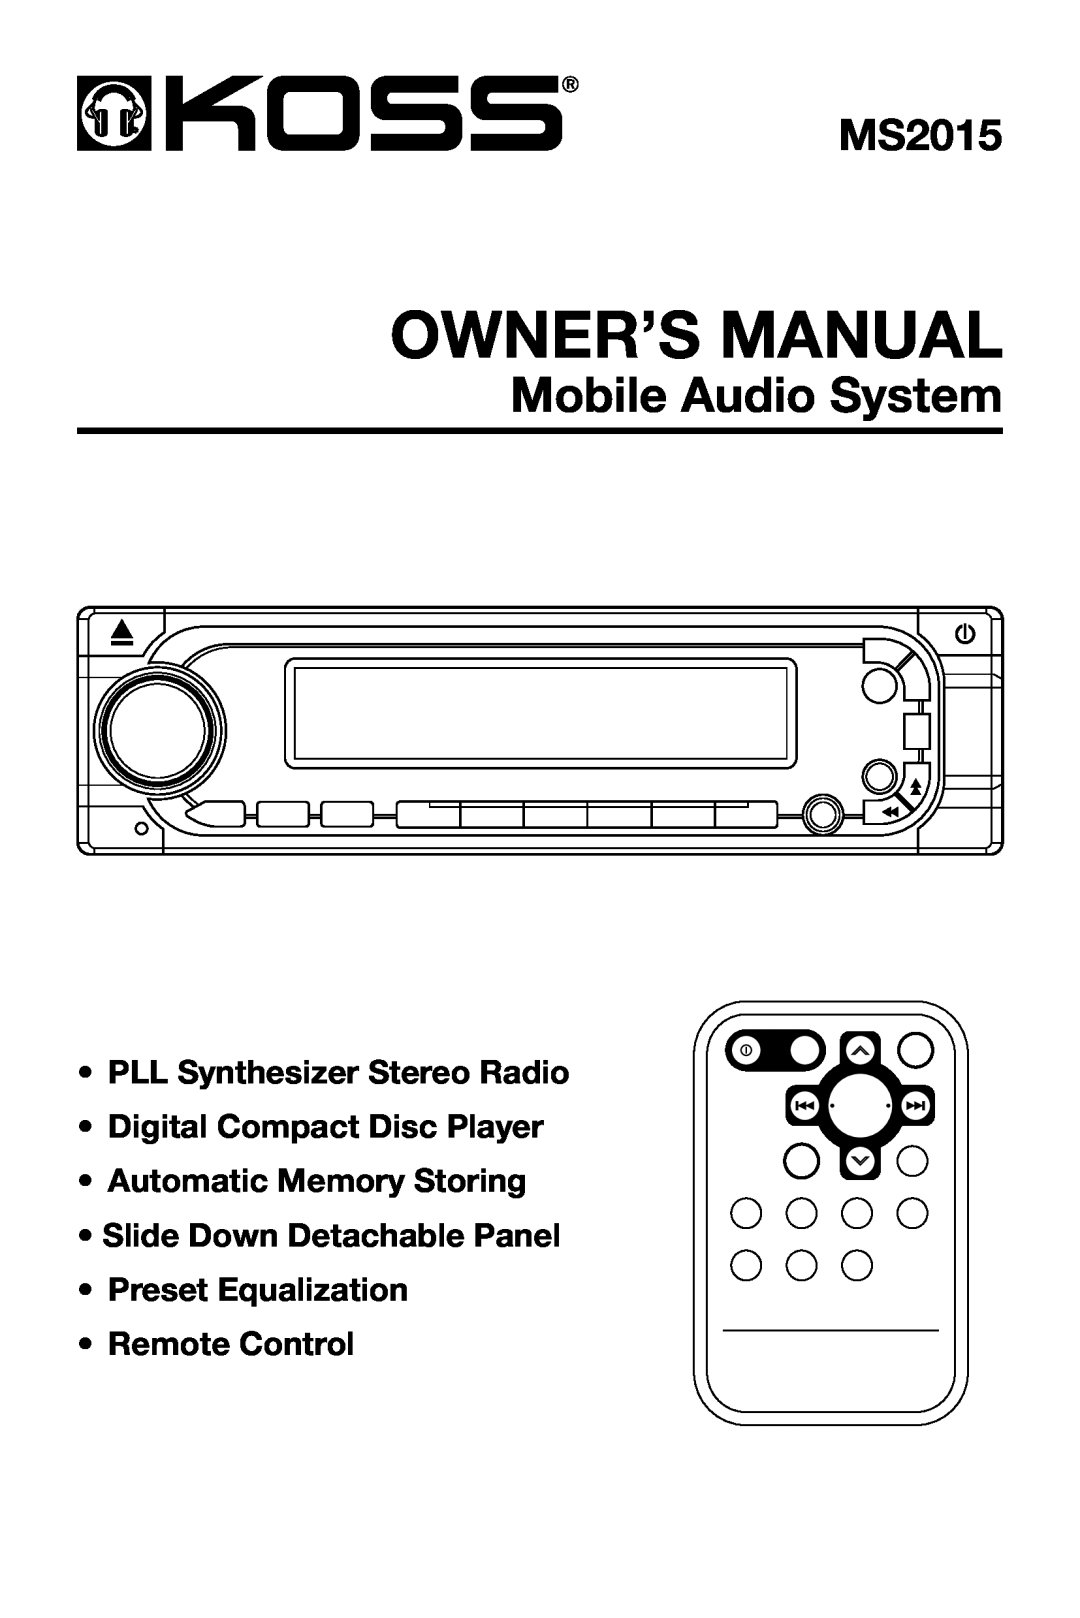 StreamLight MS2015 owner manual Mobile Audio System, PLL Synthesizer Stereo Radio, Digital Compact Disc Player 